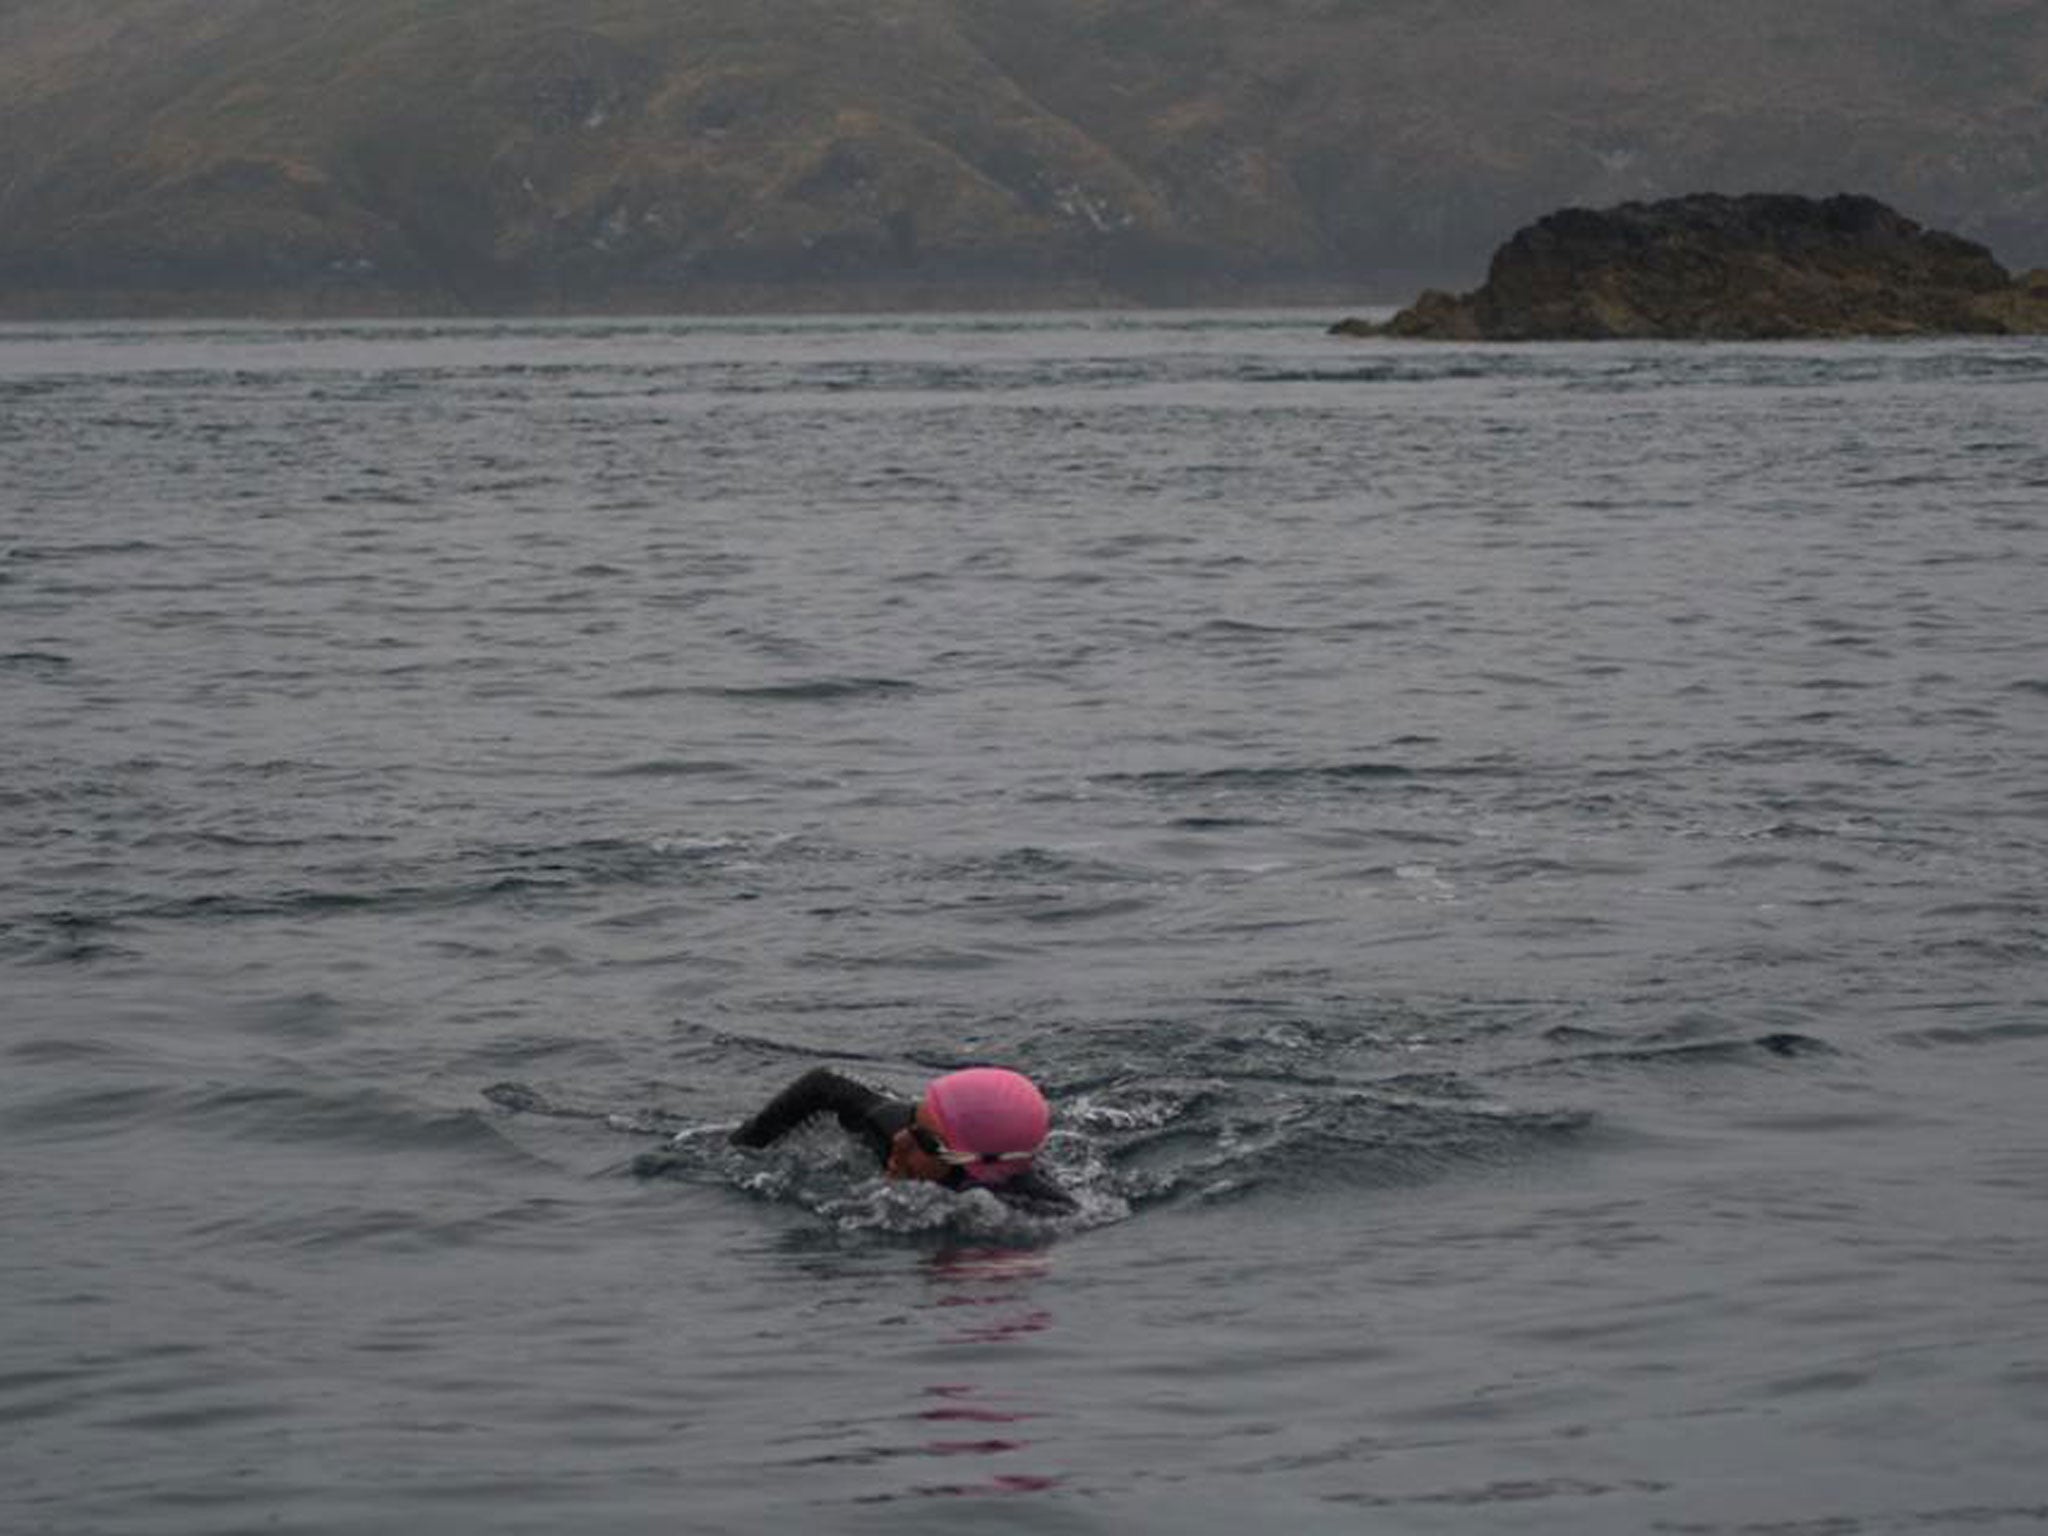 Sean Conway, who is trying to swim 1,000 miles from Land’s End to John O’Groats